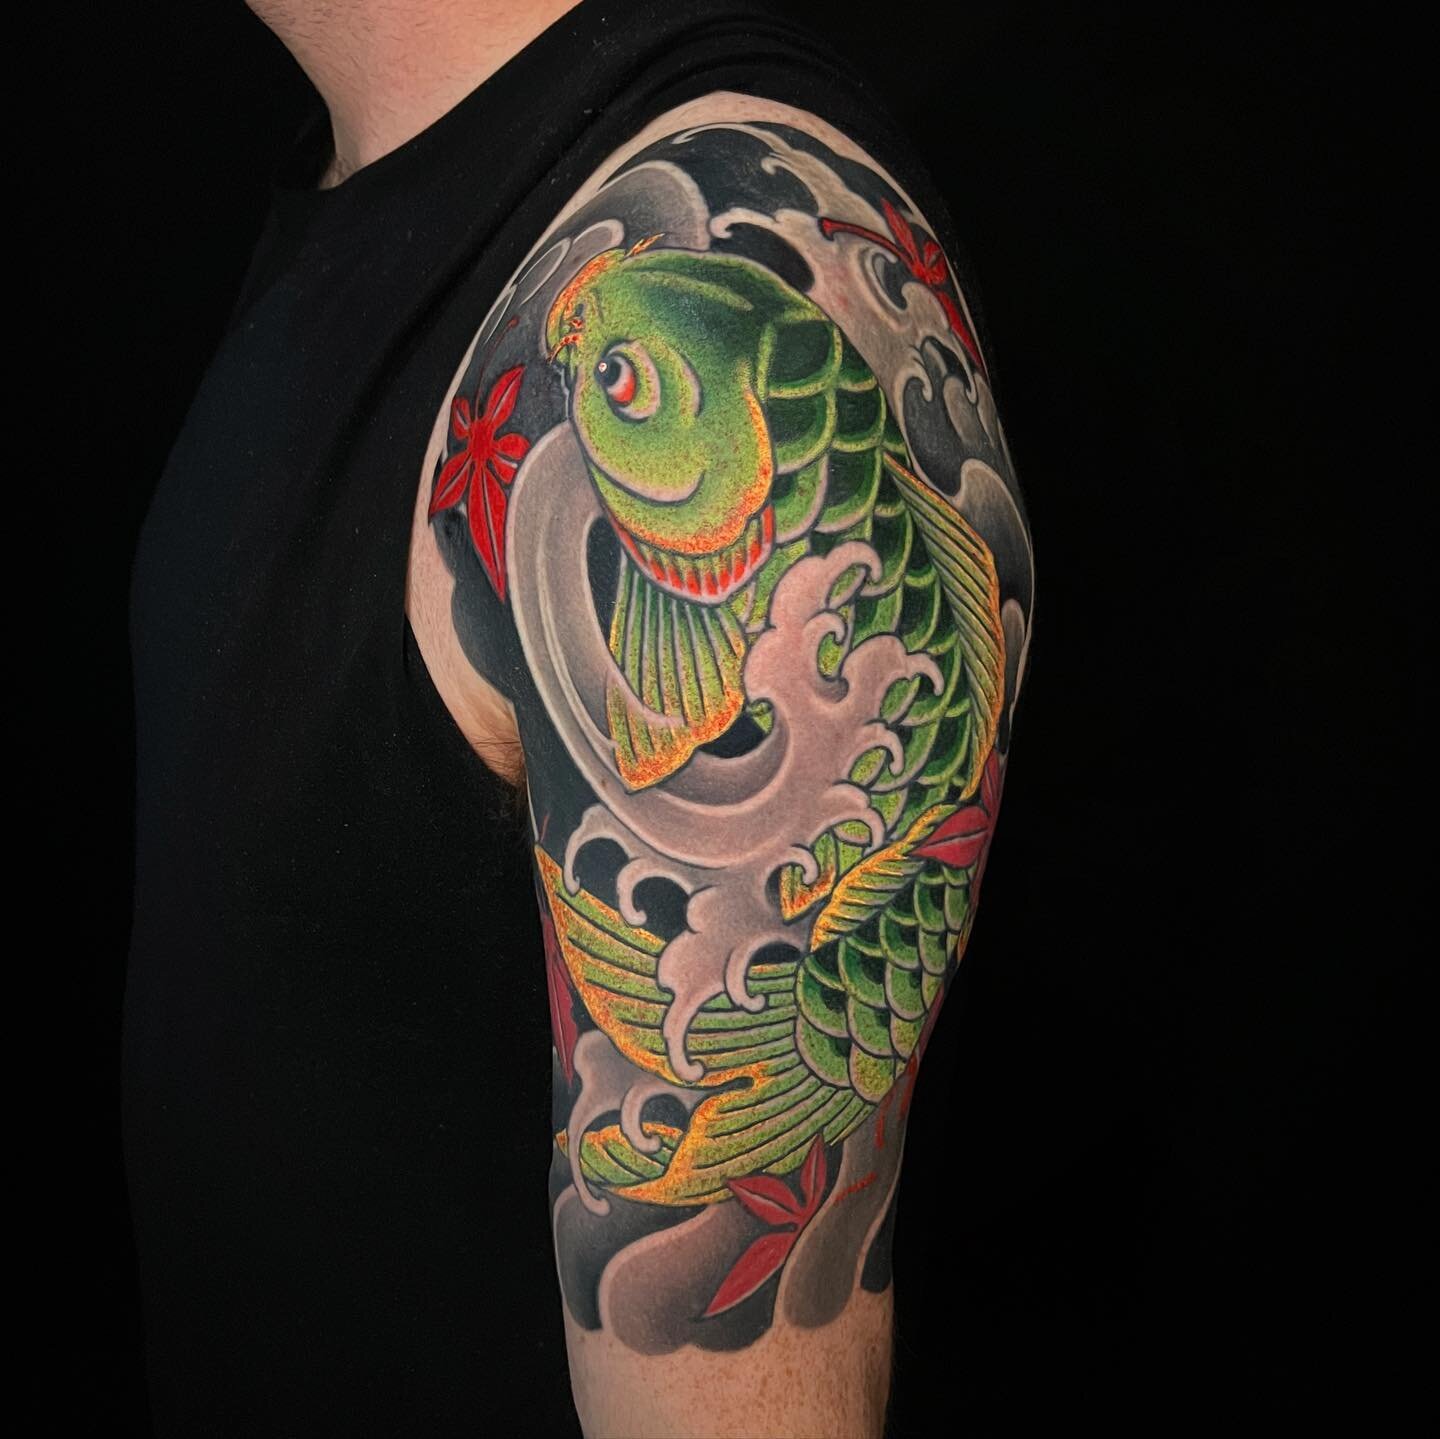 Started this half sleeve before the pandemic started. Glad to have completed it. I've wanted to do a river carp take on a koi motif for some time now. While the red/gold/silver/white/etc koi are very pretty, these colors come from domestication, and 